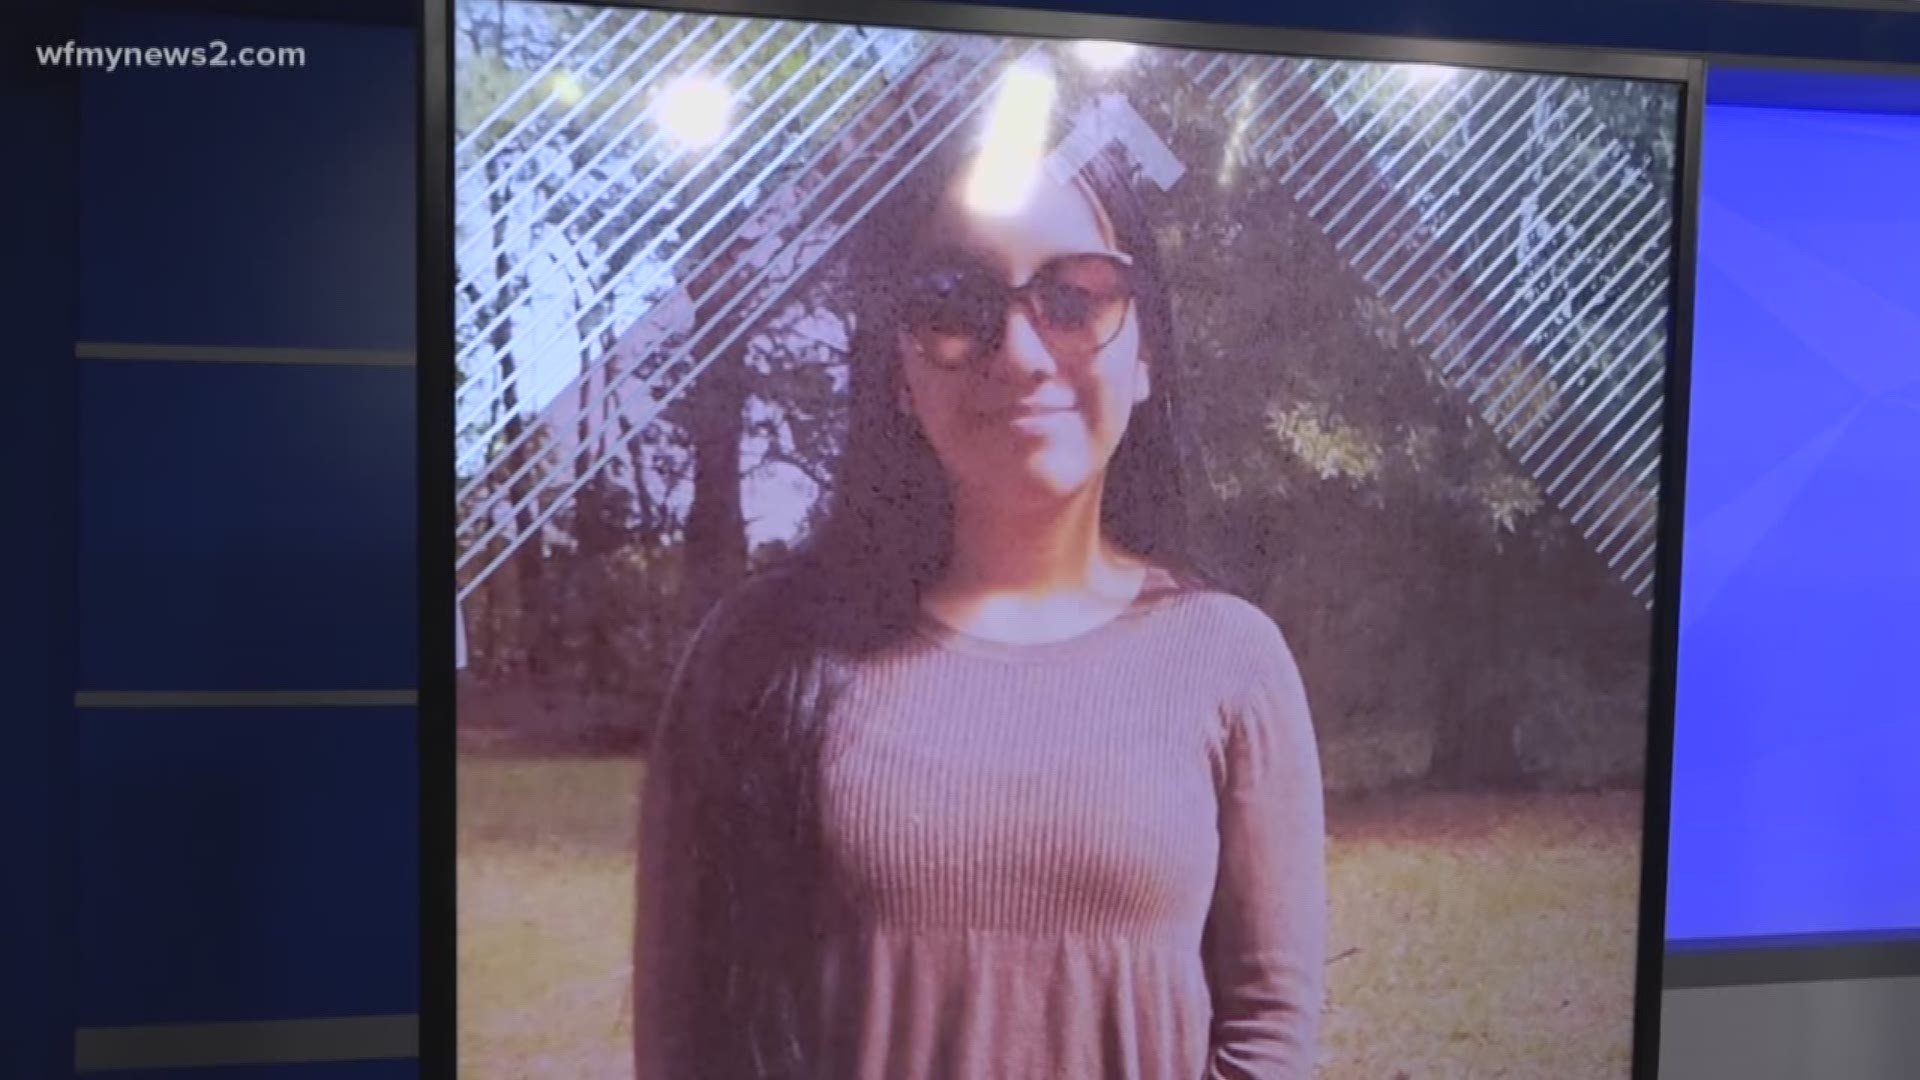 The FBI and authorities around the state continue to look for missing 13-year-old Hania Aguilar.